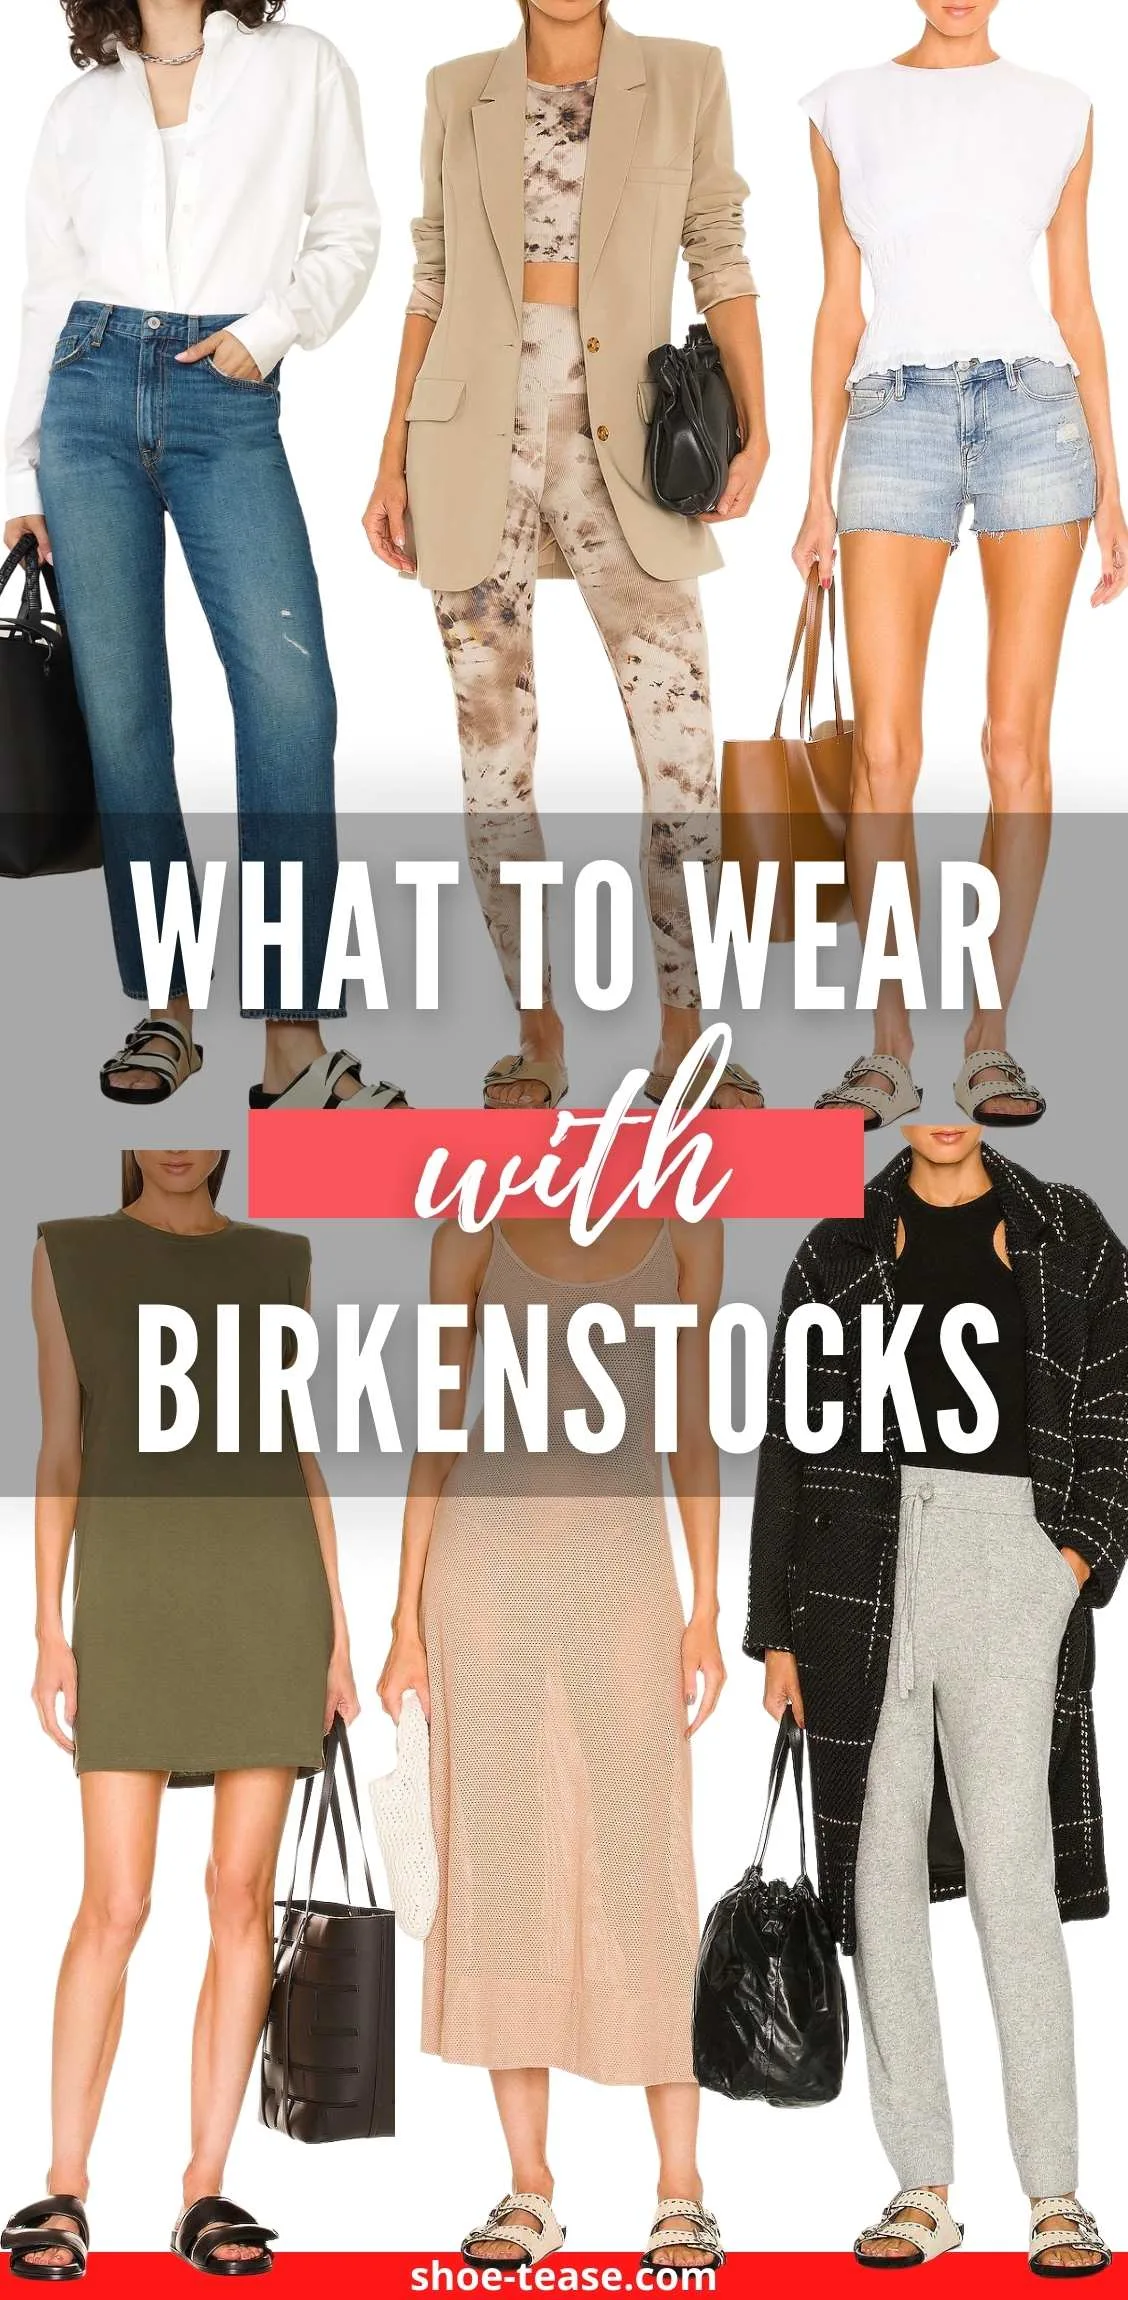 Collage of 6 women wearing birkenstock outfits under text reading what to wear with birkenstocks.